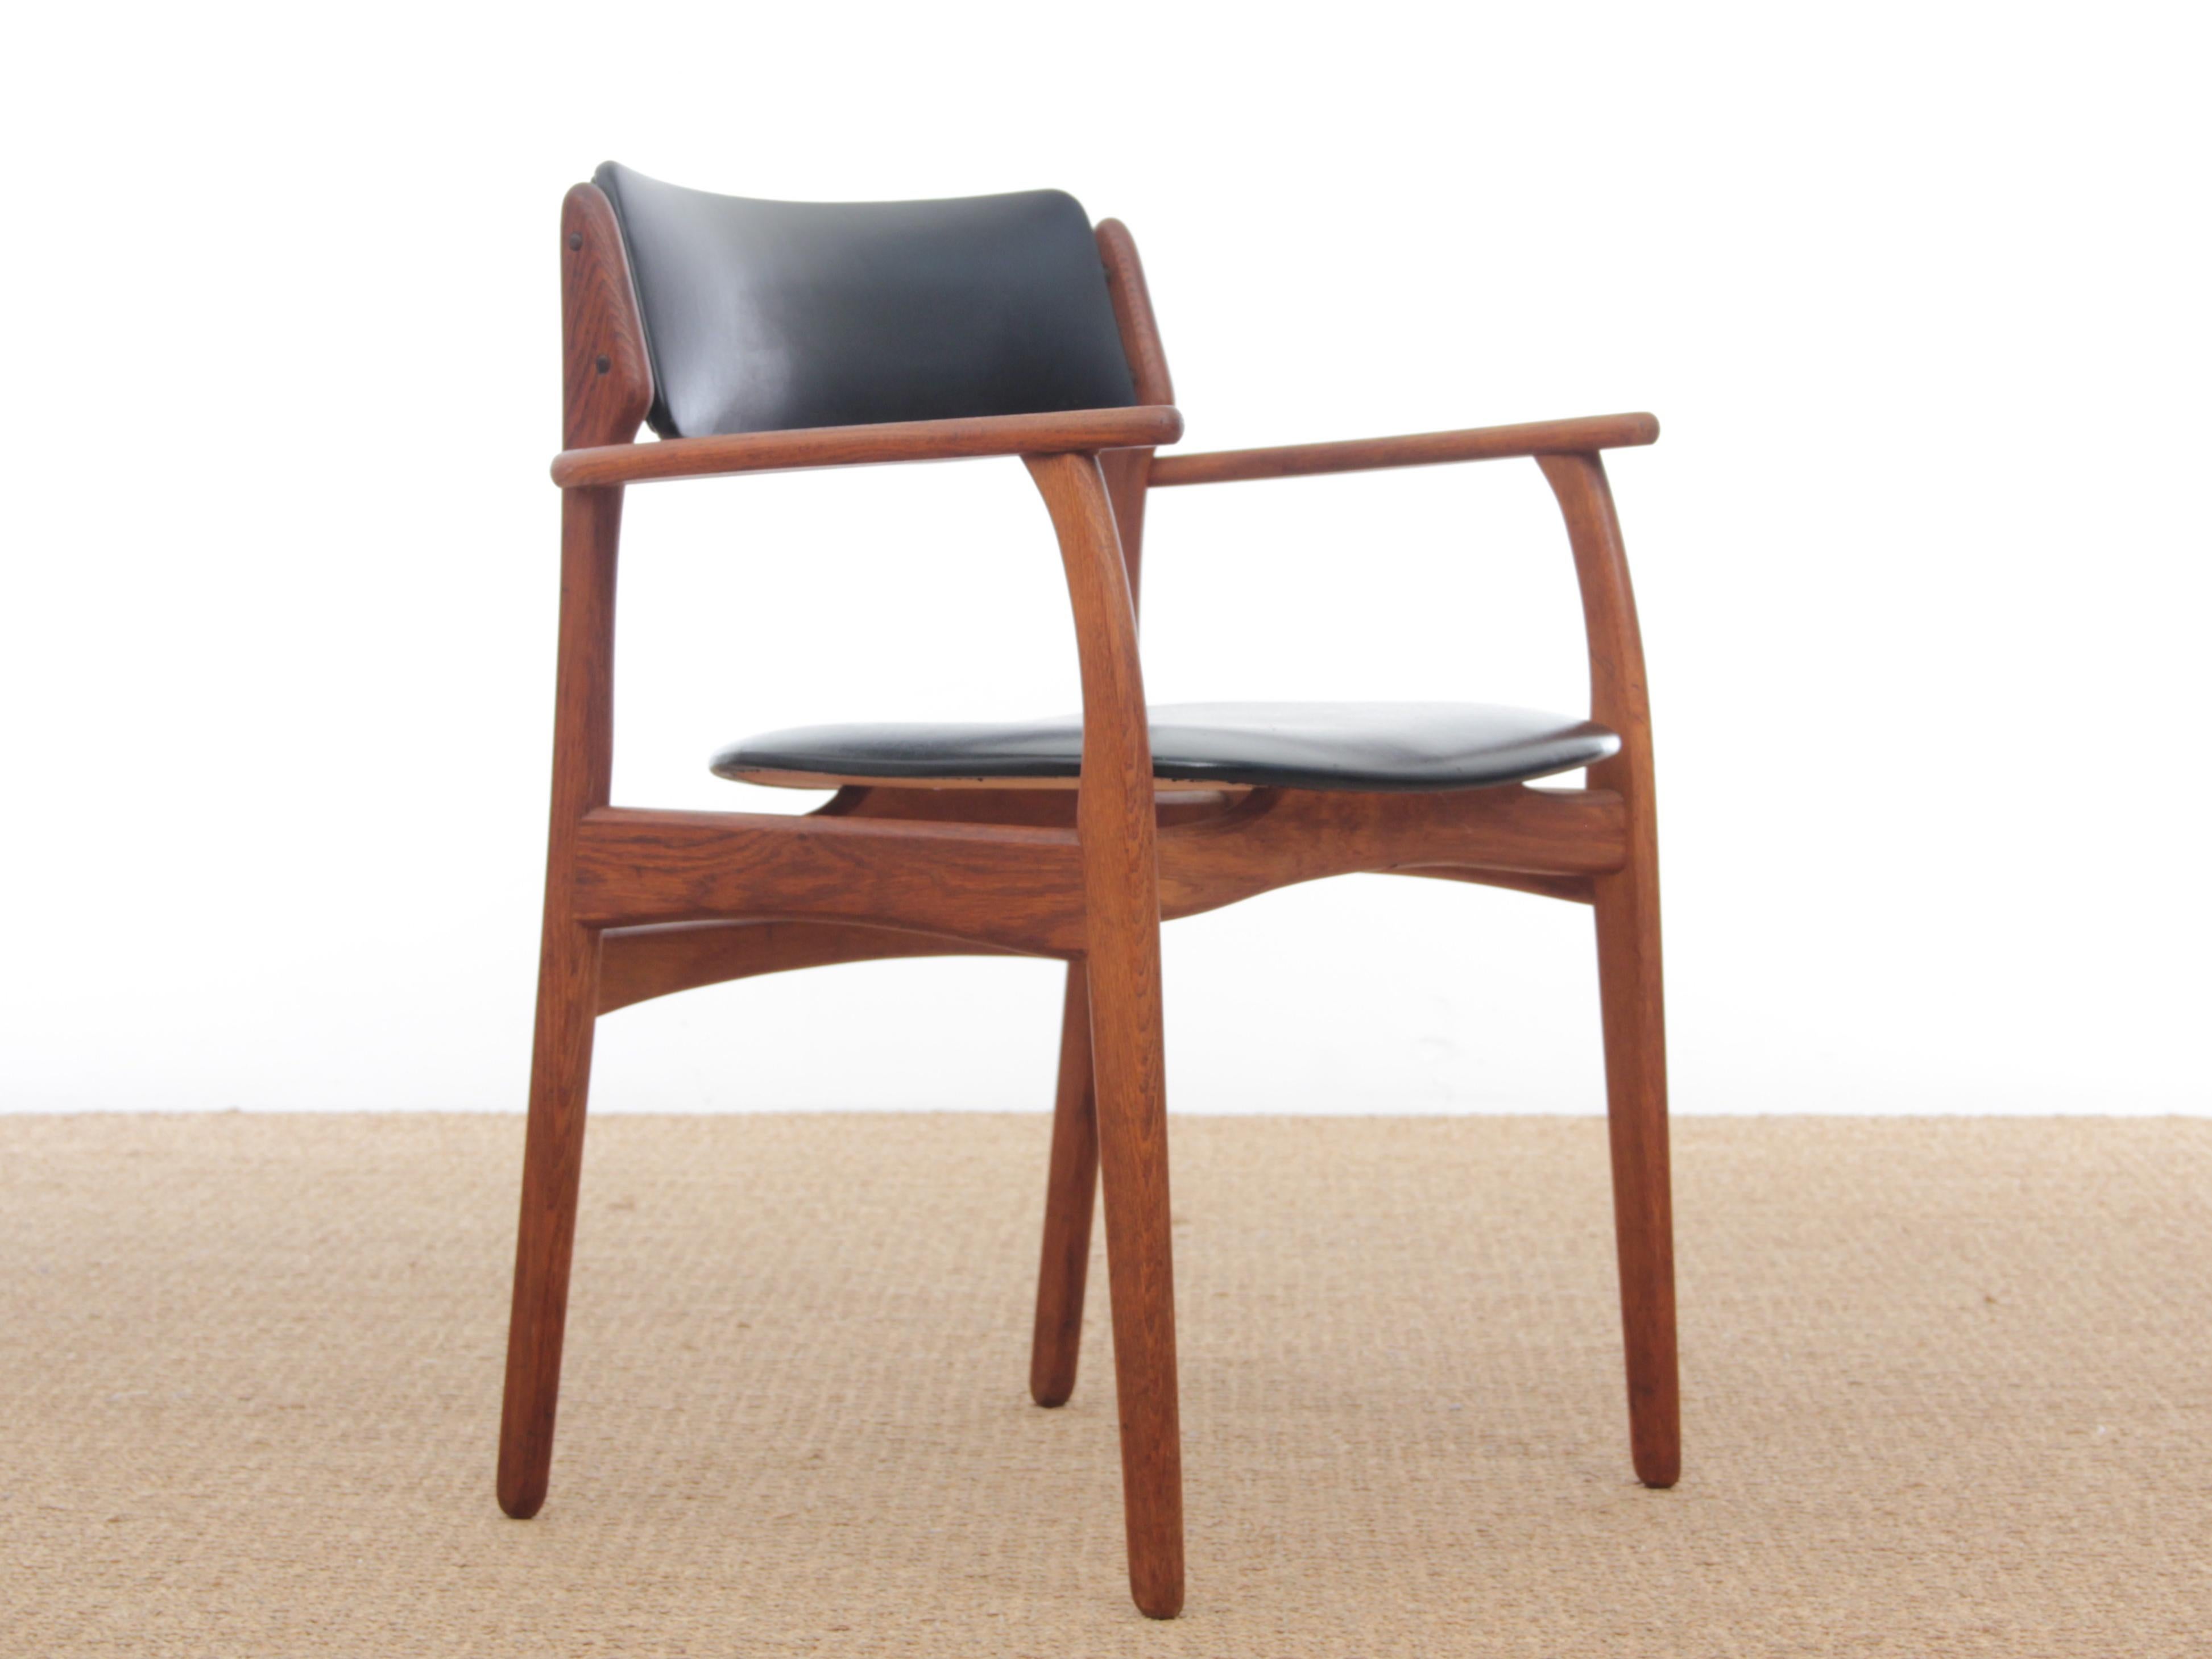 Mid-Century Modern Scandinavian arm chair in teak by Erik Buck for Povl Dinesen. Referenced by the Design Museum Denmark under number RP00899. Media Source: 40 years of Danish furniture design : the Copenhagen Cabinetmakers’ Guild exhibitions